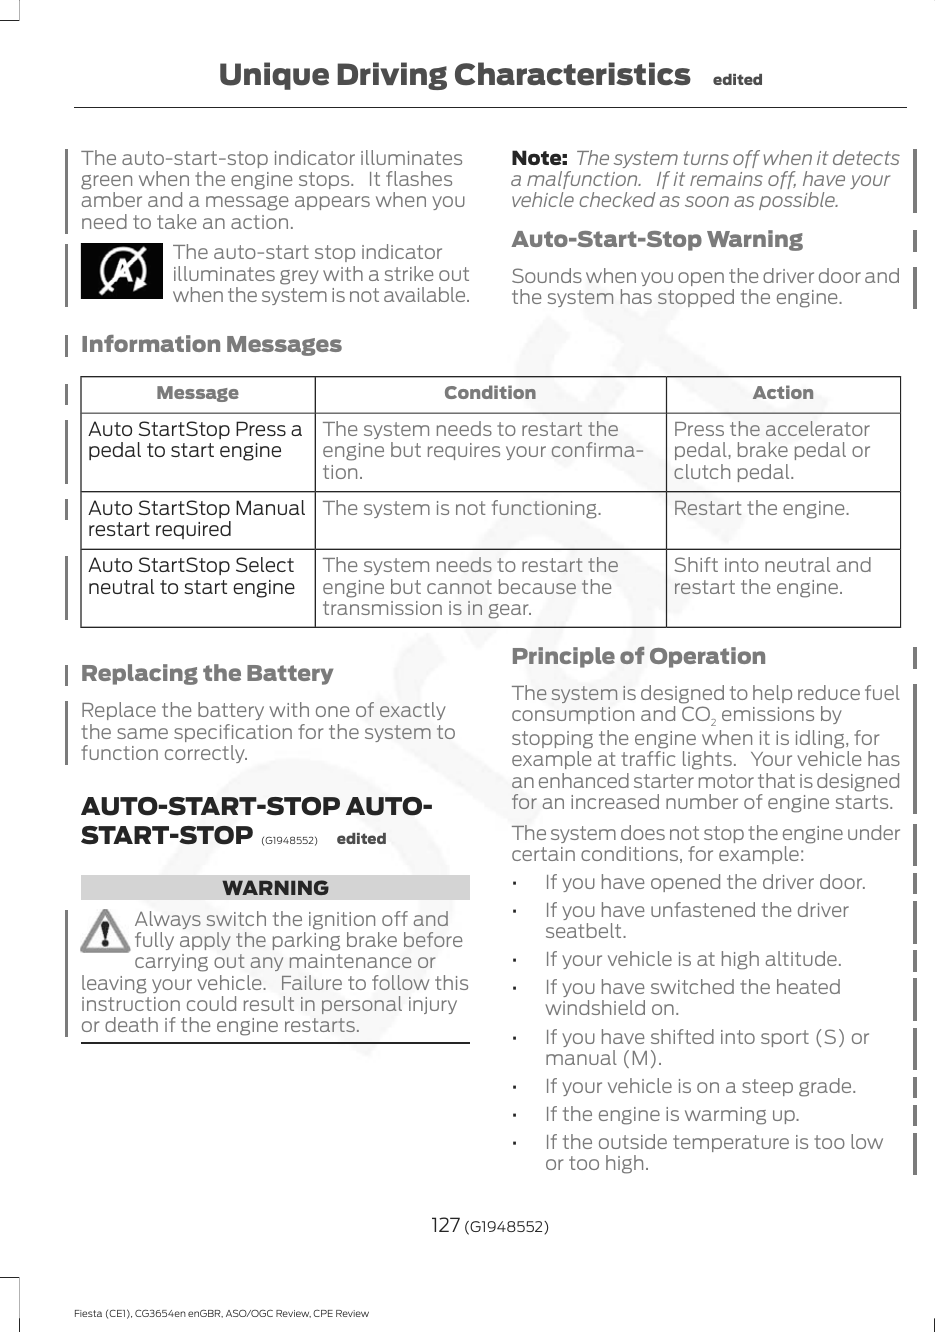 The auto-start-stop indicator illuminatesgreen when the engine stops. It flashesamber and a message appears when youneed to take an action.The auto-start stop indicatorilluminates grey with a strike outwhen the system is not available.Note: The system turns off when it detectsa malfunction. If it remains off, have yourvehicle checked as soon as possible.Auto-Start-Stop WarningSounds when you open the driver door andthe system has stopped the engine.Information MessagesActionConditionMessagePress the acceleratorpedal, brake pedal orclutch pedal.The system needs to restart theengine but requires your confirma-tion.Auto StartStop Press apedal to start engineRestart the engine.The system is not functioning.Auto StartStop Manualrestart requiredShift into neutral andrestart the engine.The system needs to restart theengine but cannot because thetransmission is in gear.Auto StartStop Selectneutral to start engineReplacing the BatteryReplace the battery with one of exactlythe same specification for the system tofunction correctly.AUTO-START-STOP AUTO-START-STOP  (G1948552) editedWARNINGAlways switch the ignition off andfully apply the parking brake beforecarrying out any maintenance orleaving your vehicle. Failure to follow thisinstruction could result in personal injuryor death if the engine restarts.Principle of OperationThe system is designed to help reduce fuelconsumption and CO2 emissions bystopping the engine when it is idling, forexample at traffic lights. Your vehicle hasan enhanced starter motor that is designedfor an increased number of engine starts.The system does not stop the engine undercertain conditions, for example:•If you have opened the driver door.•If you have unfastened the driverseatbelt.•If your vehicle is at high altitude.•If you have switched the heatedwindshield on.•If you have shifted into sport (S) ormanual (M).•If your vehicle is on a steep grade.•If the engine is warming up.•If the outside temperature is too lowor too high.127 (G1948552)Fiesta (CE1), CG3654en enGBR, ASO/OGC Review, CPE ReviewUnique Driving Characteristics edited